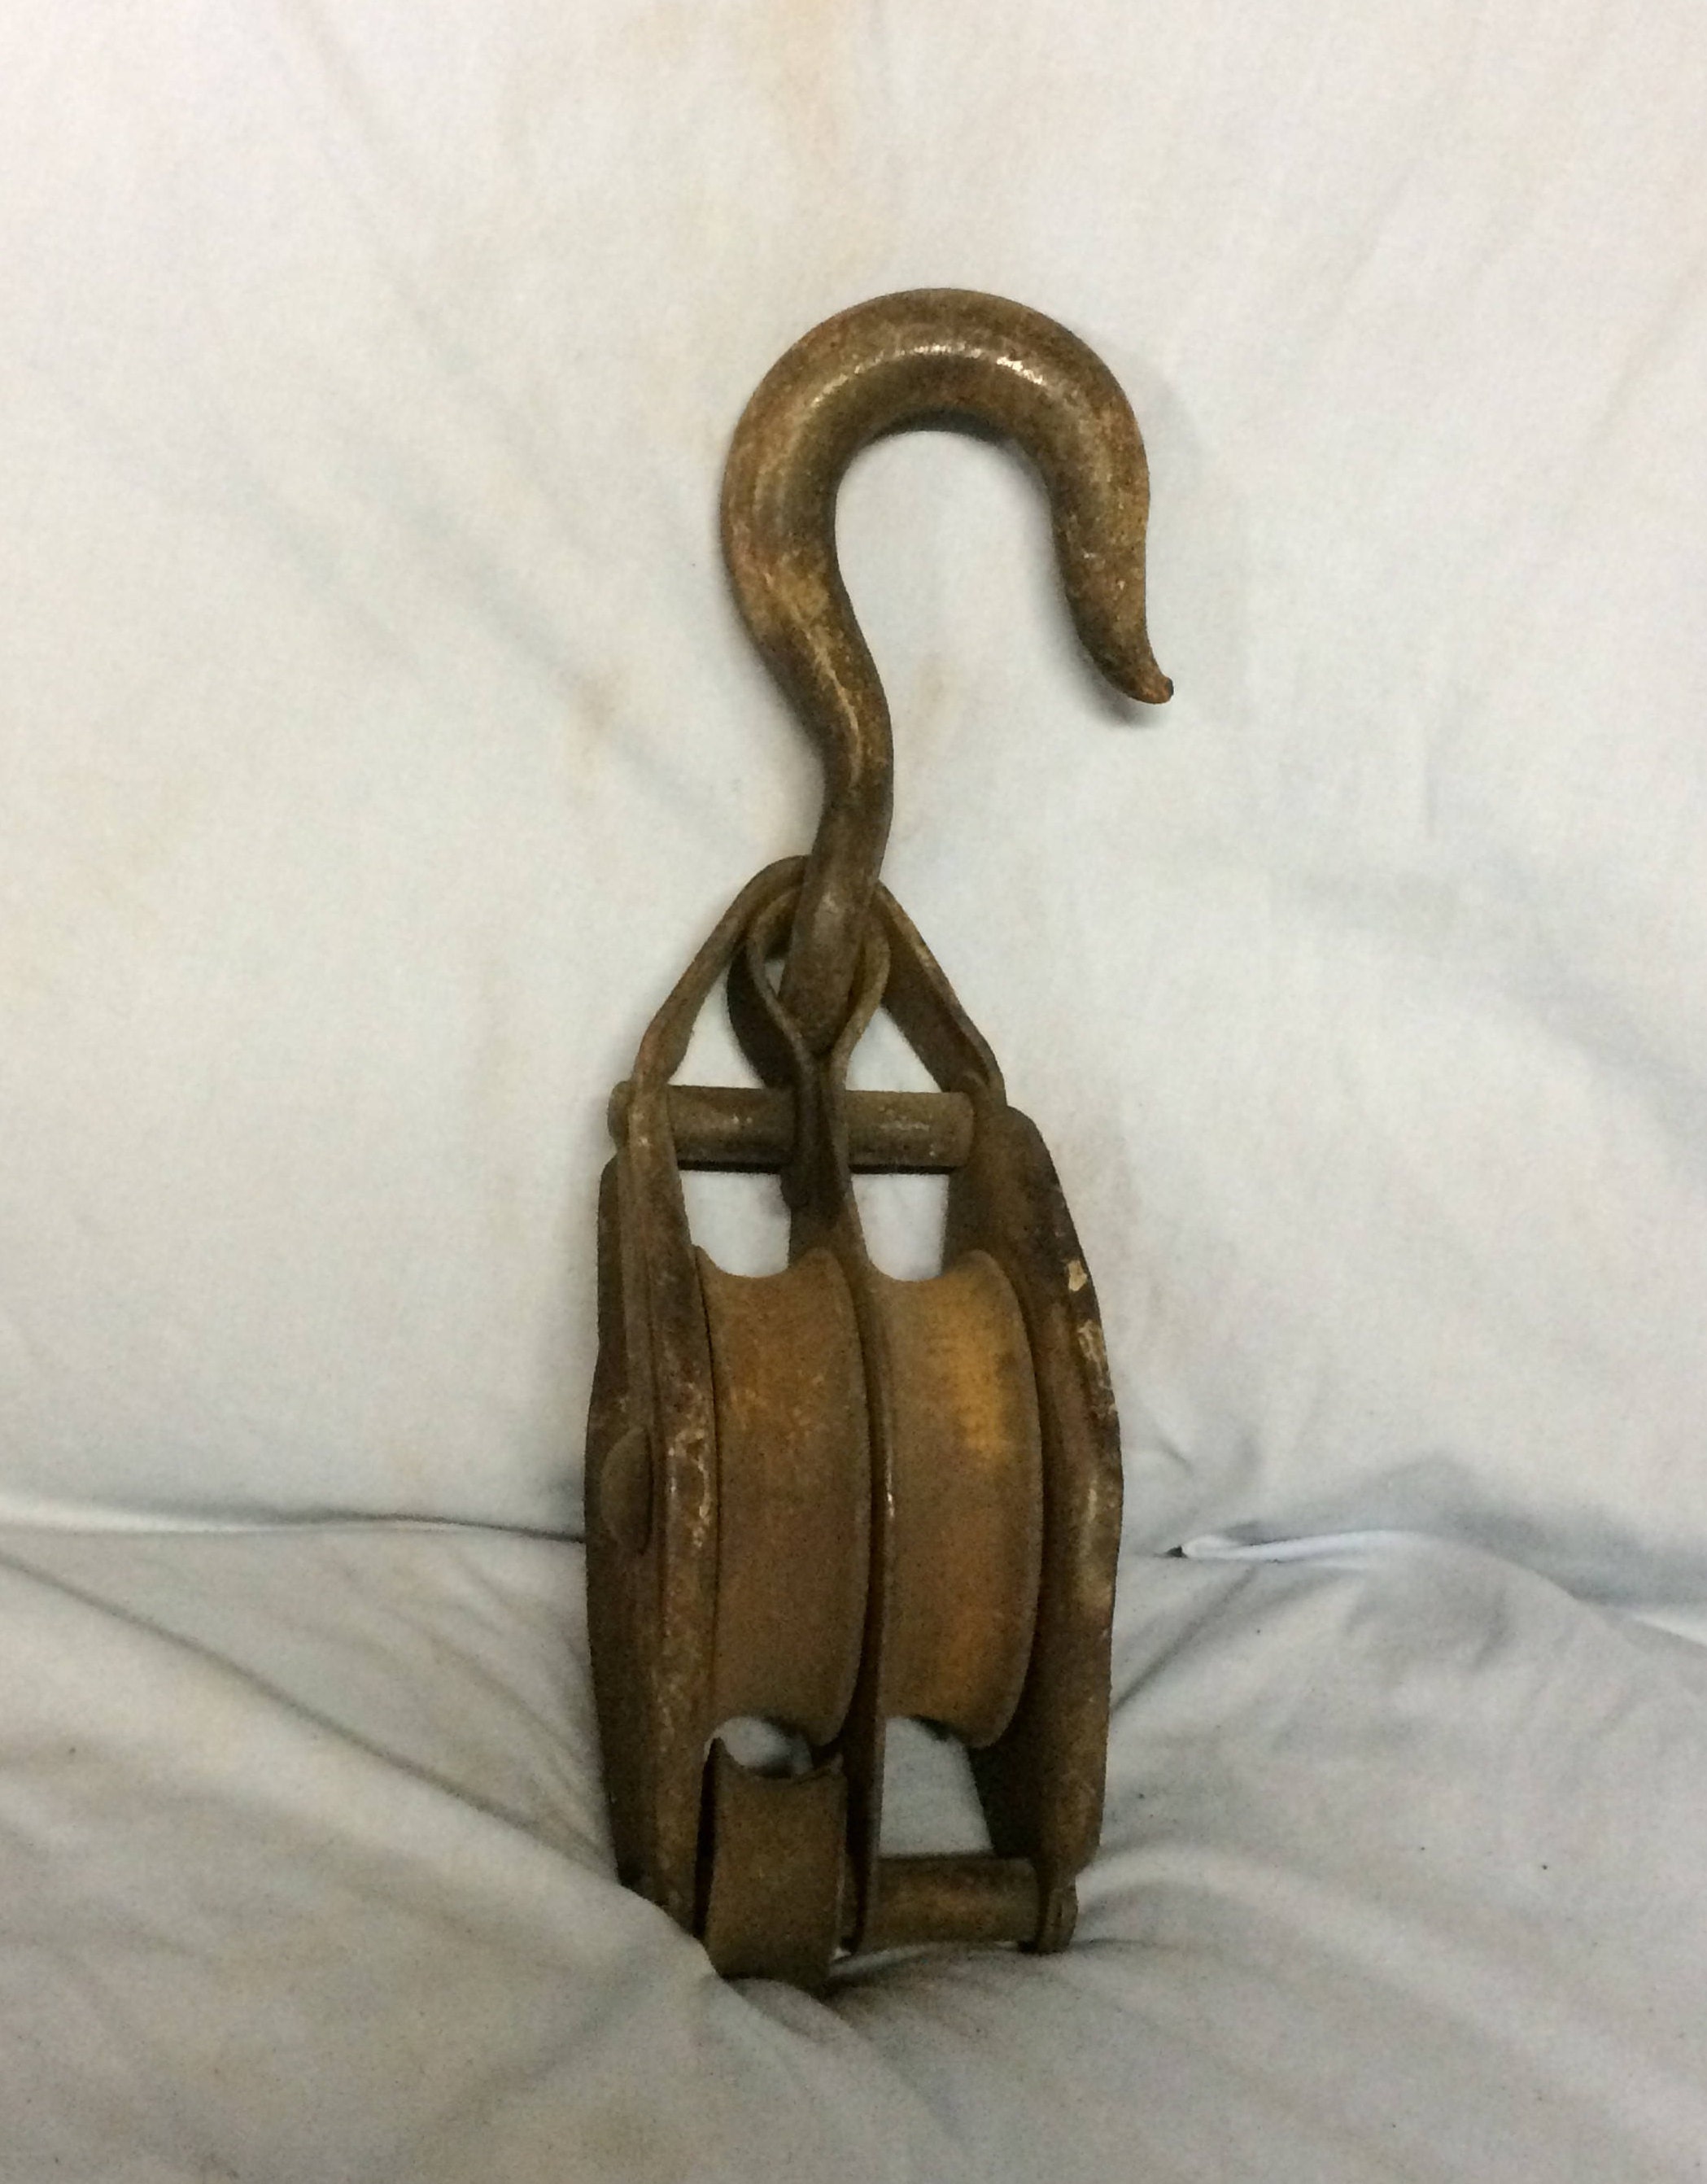 Vintage Double Iron Barn Pulley Block and Tackle Pulley Vintage Rustic ...